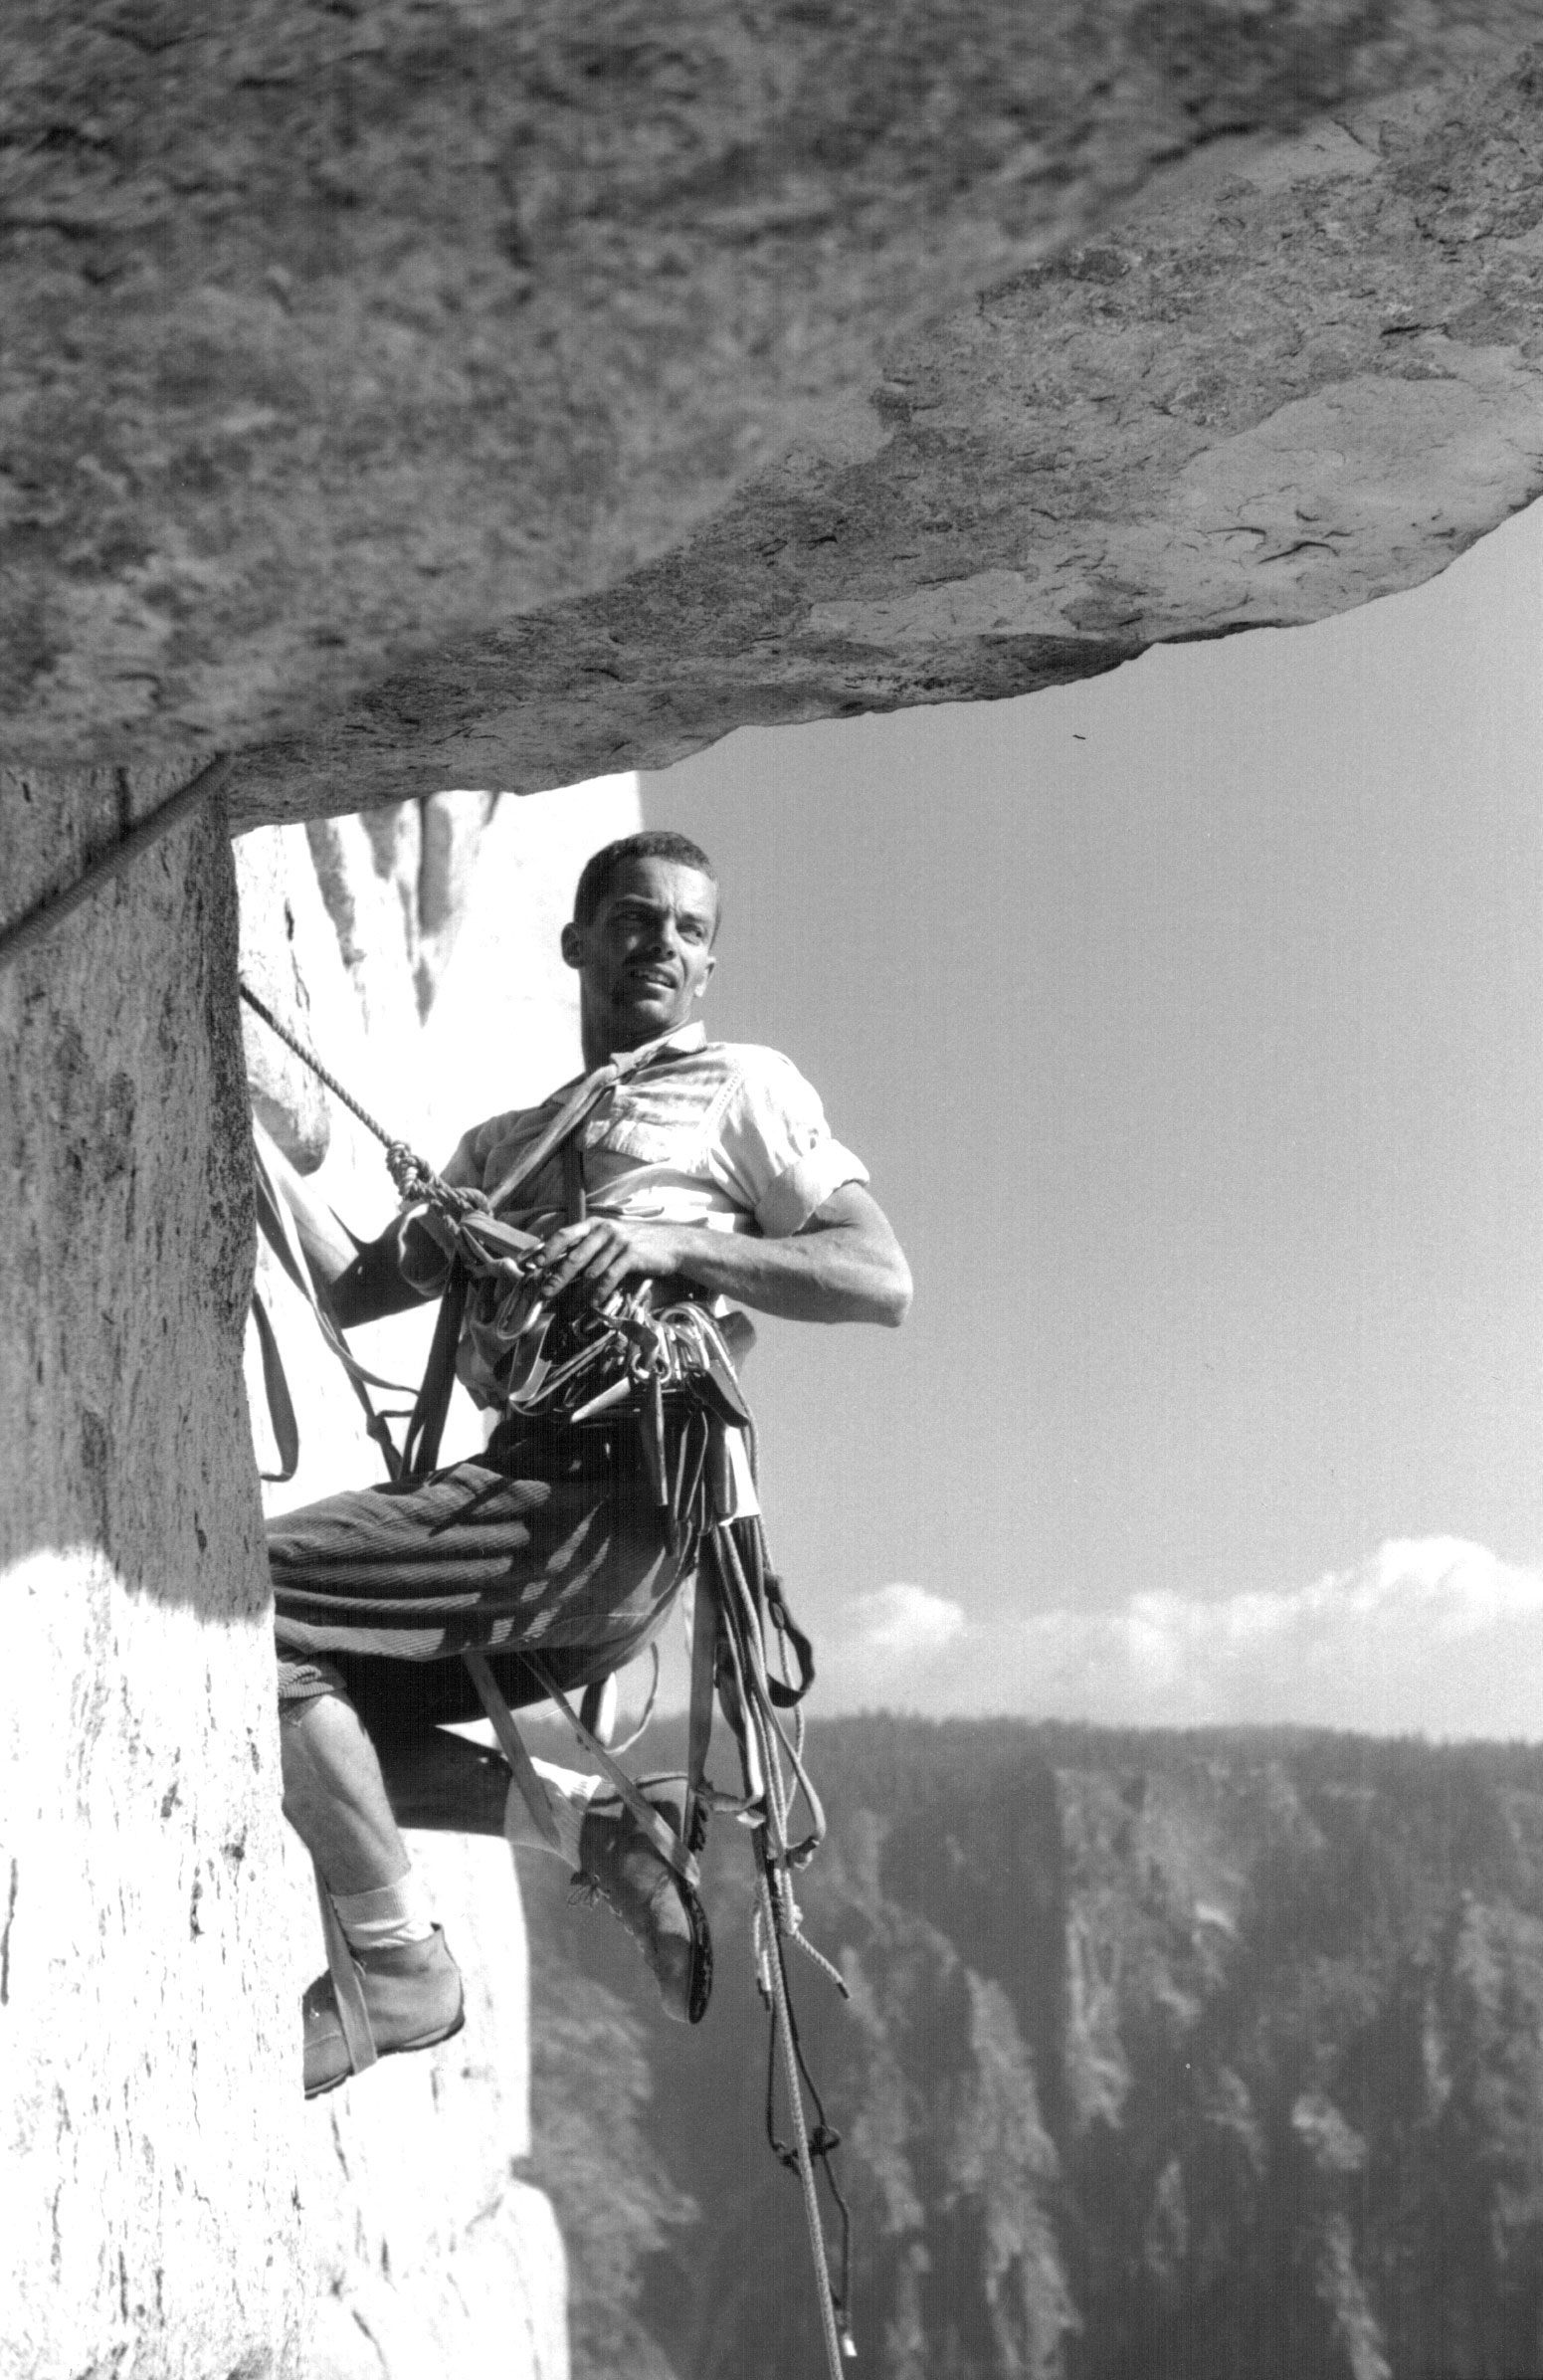 Tom Frost leads Pitch 29 during the first ascent of the Salathe Wall on El Capitan in 1961. Frost, Chuck Pratt and Royal Robbins completed the climb over nine and a half days. [Photo] Royal Robbins, Tom Frost collection